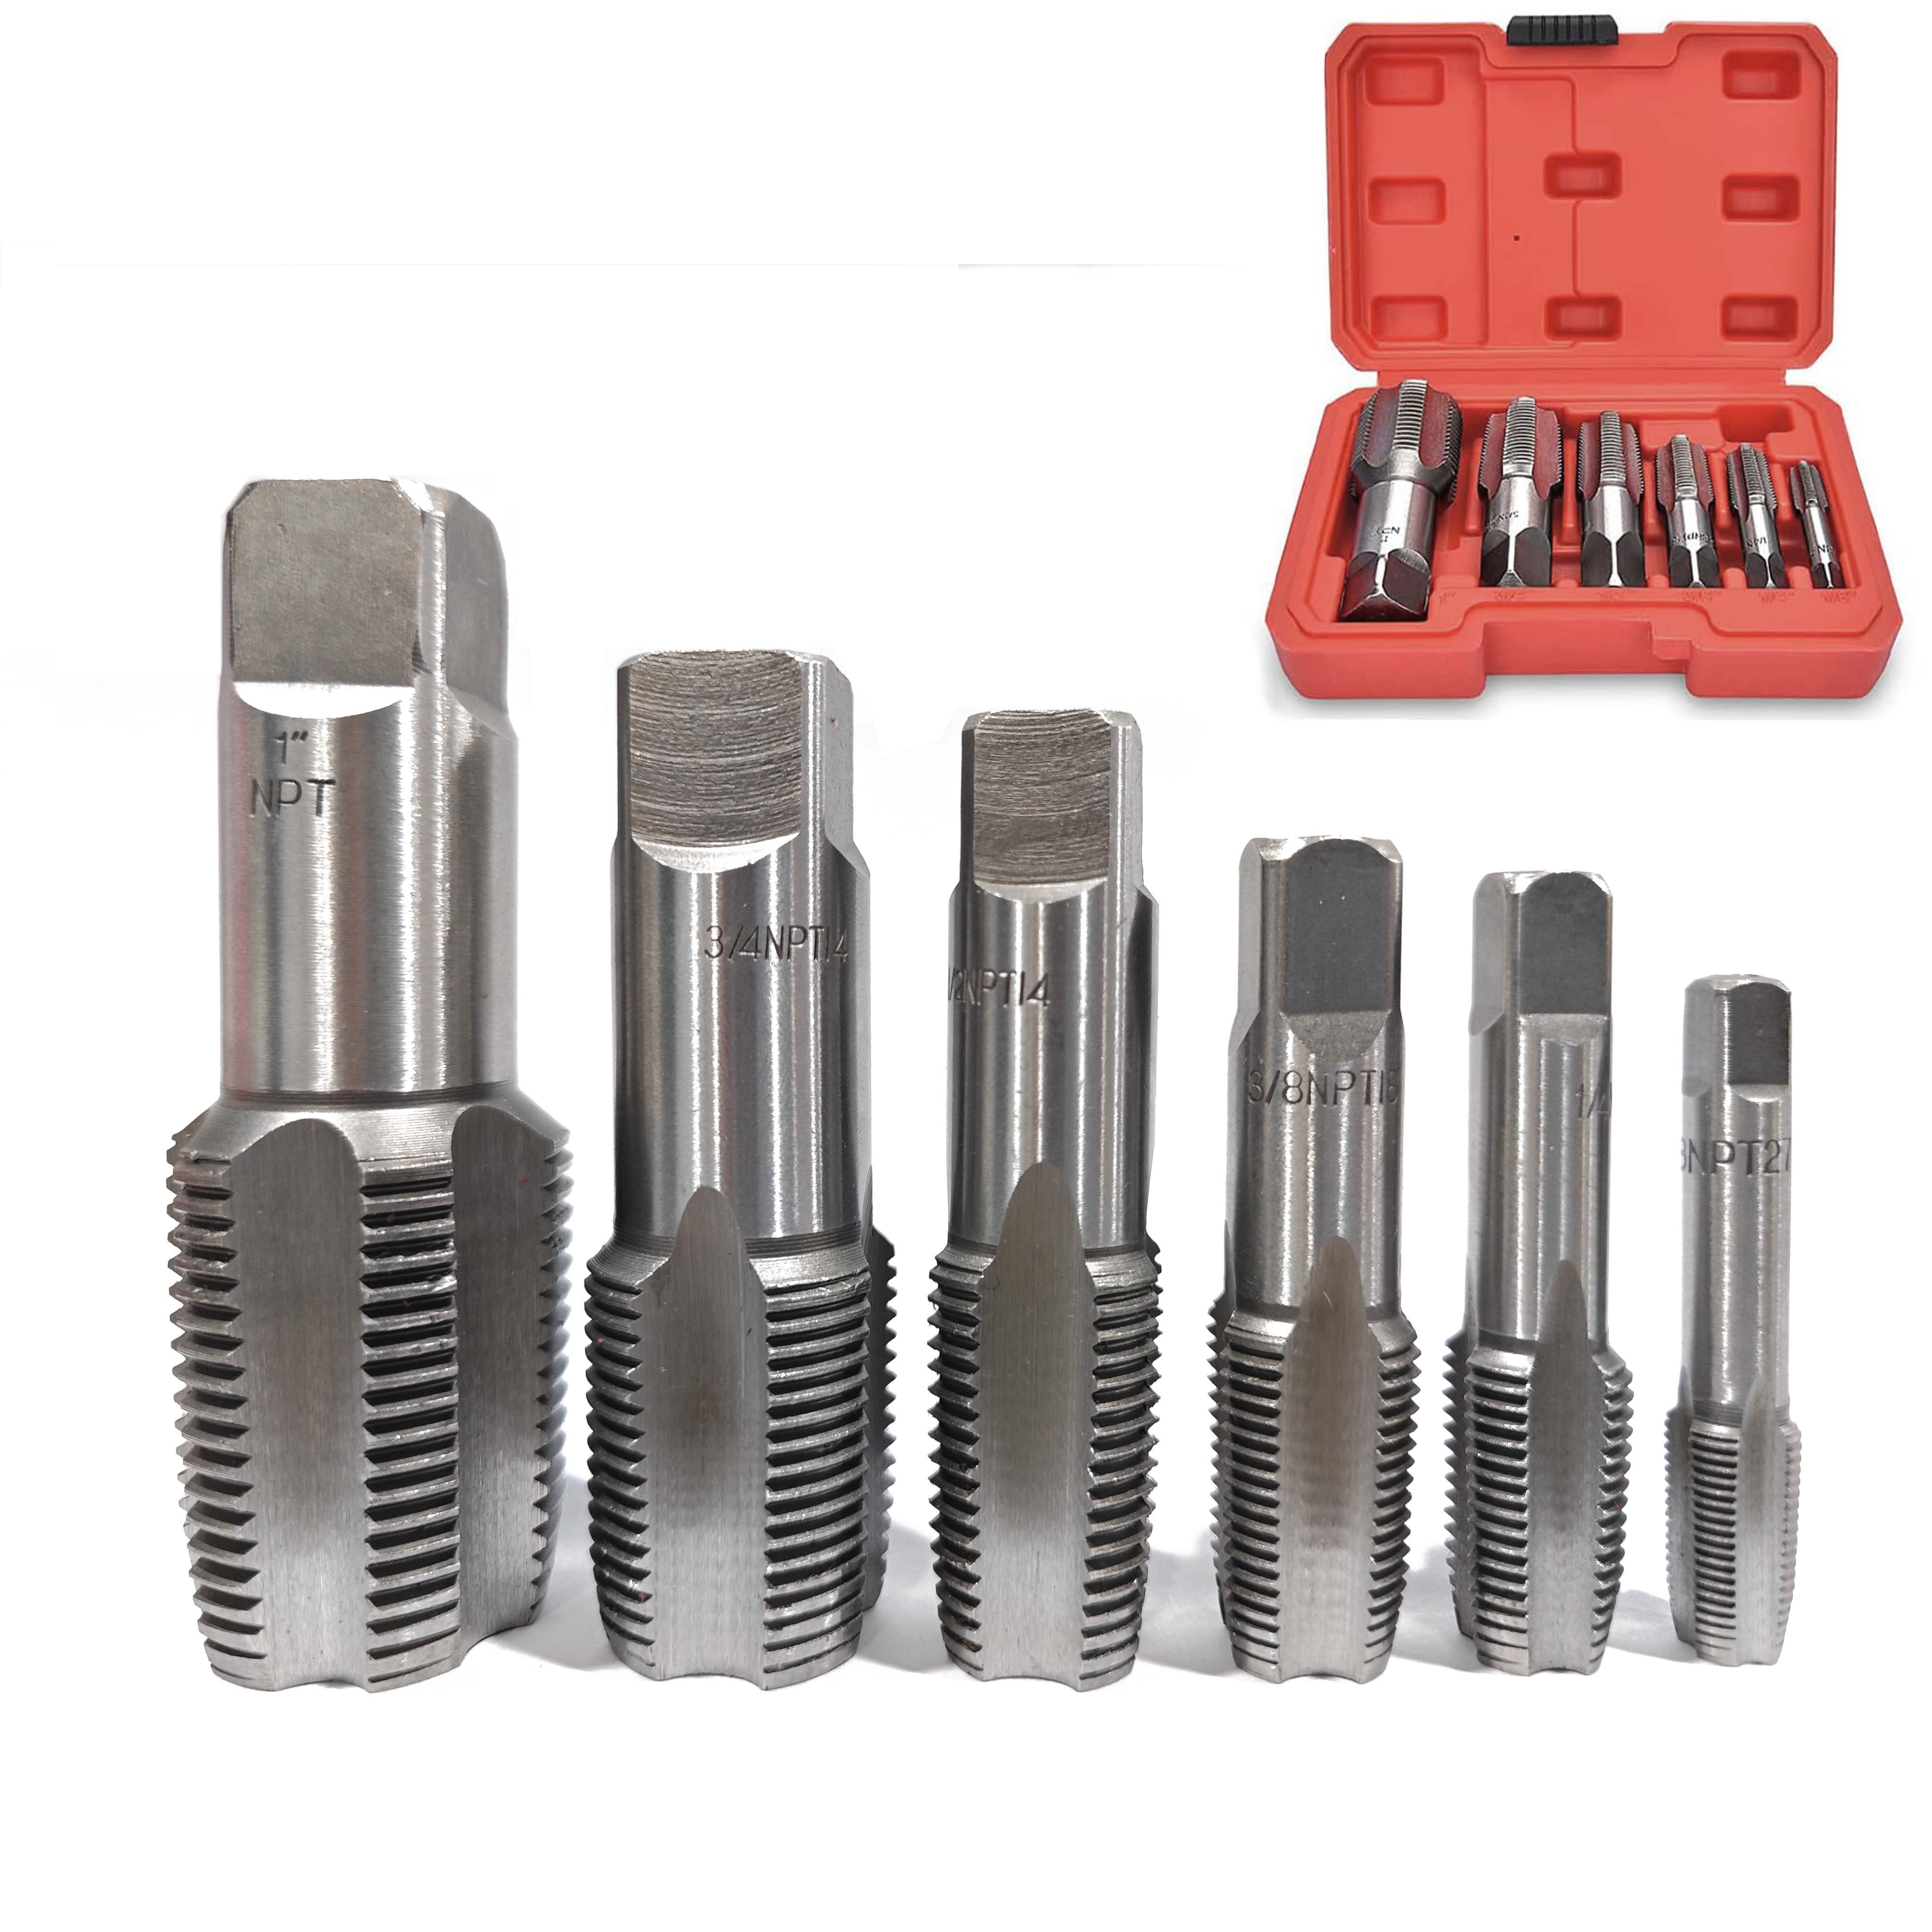 

5-piece/6-piece Npt Thread Restoration Tap Set - Alloy Pipe Thread Repair Kit For Clearing Blockages Or Rebuilding Damaged Threads (sizes 1/8", 1/4", 3/8", 1/2", 3/4", 1") With Convenient Storage Case